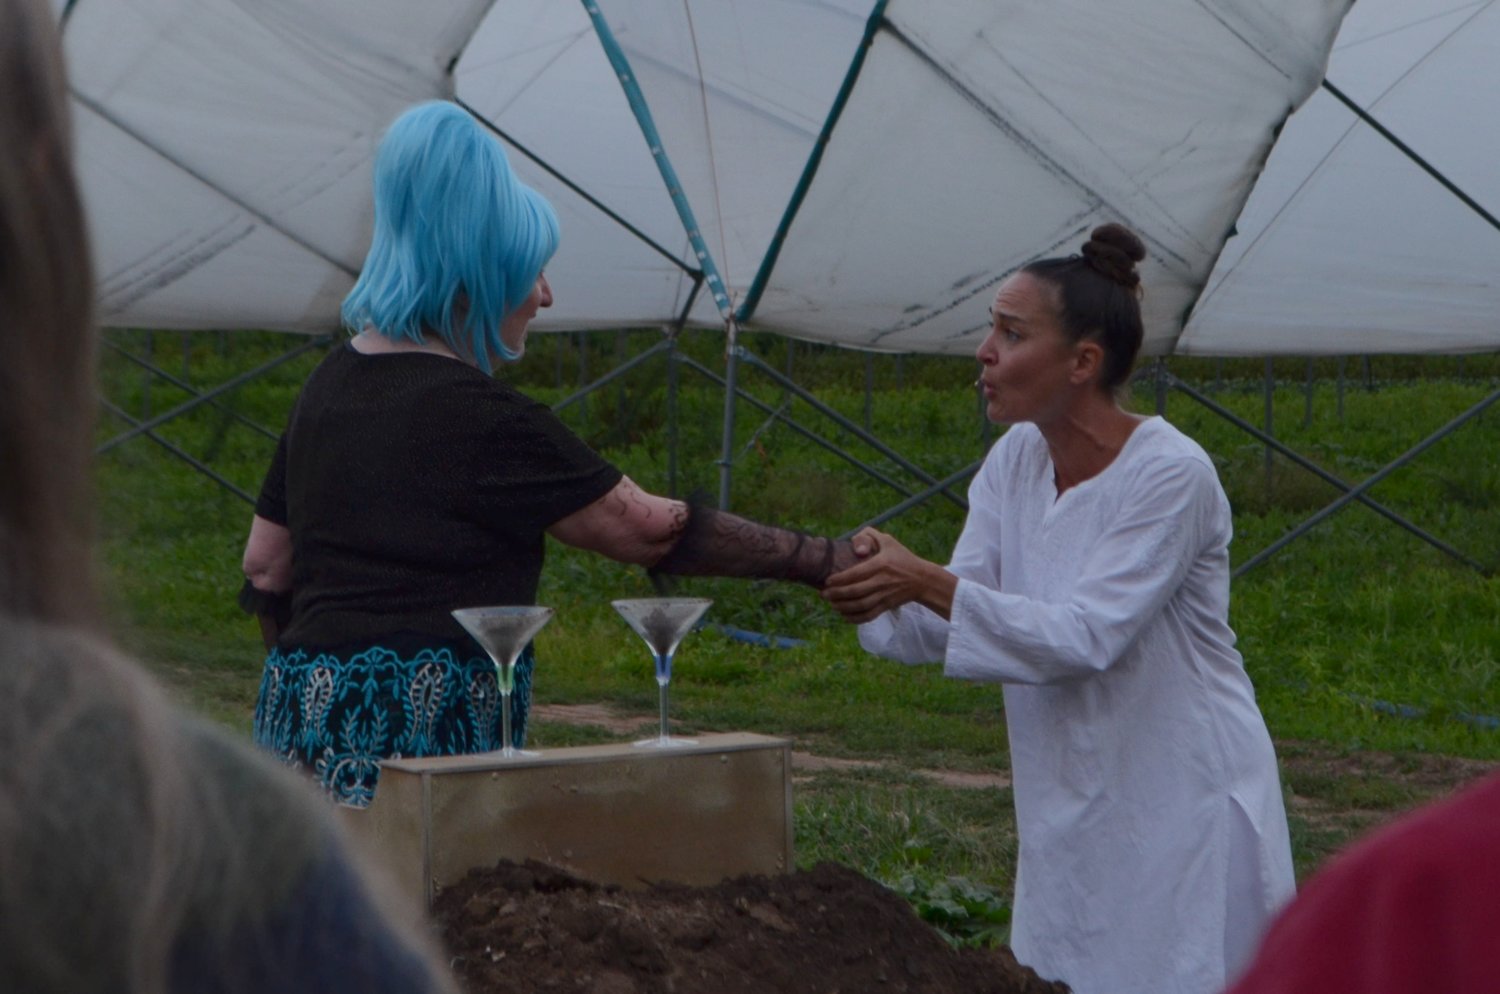 Cilly the Microbe (played by Annie Hat, left) meets with Lynn Margulis (played by Jess Beveridge) over drinks at a compost party.